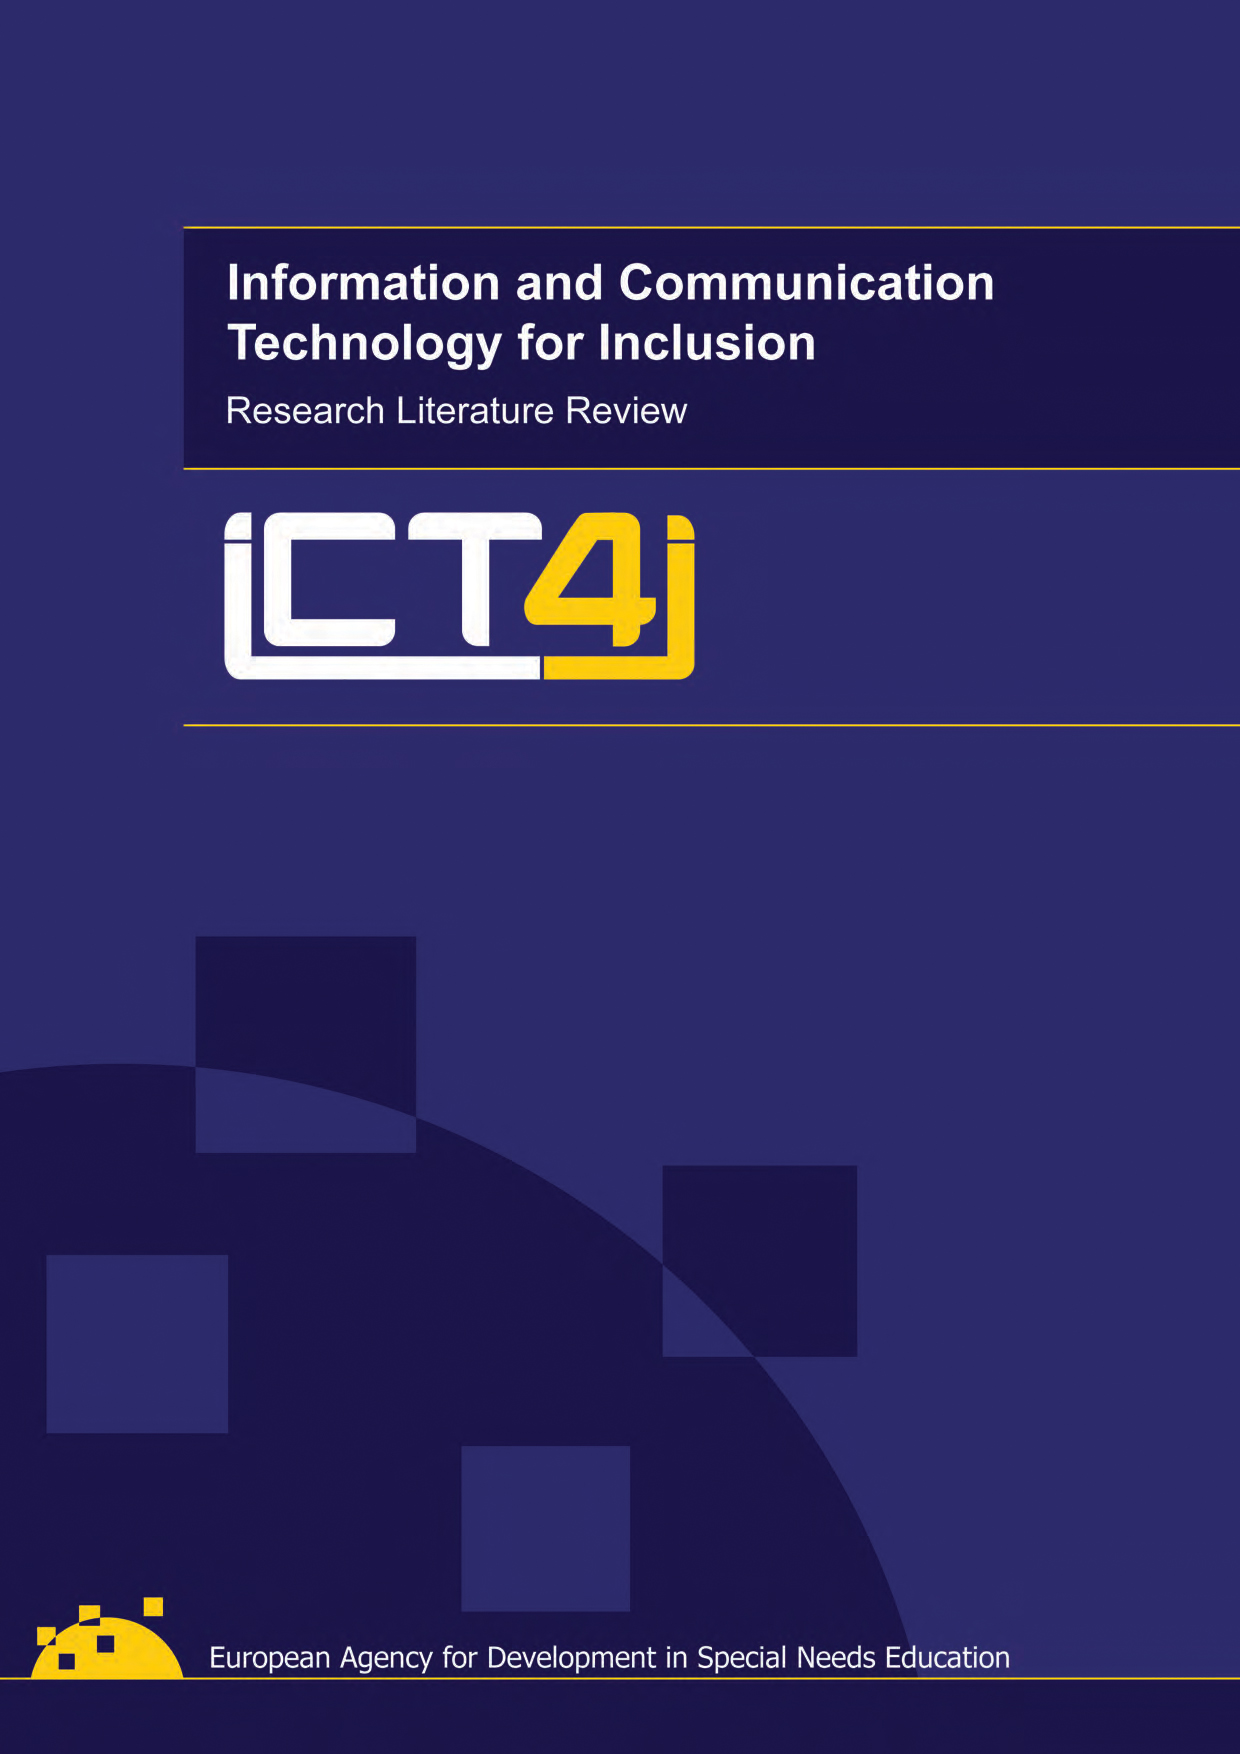 Information and Communication Technology for Inclusion – Research Literature Review